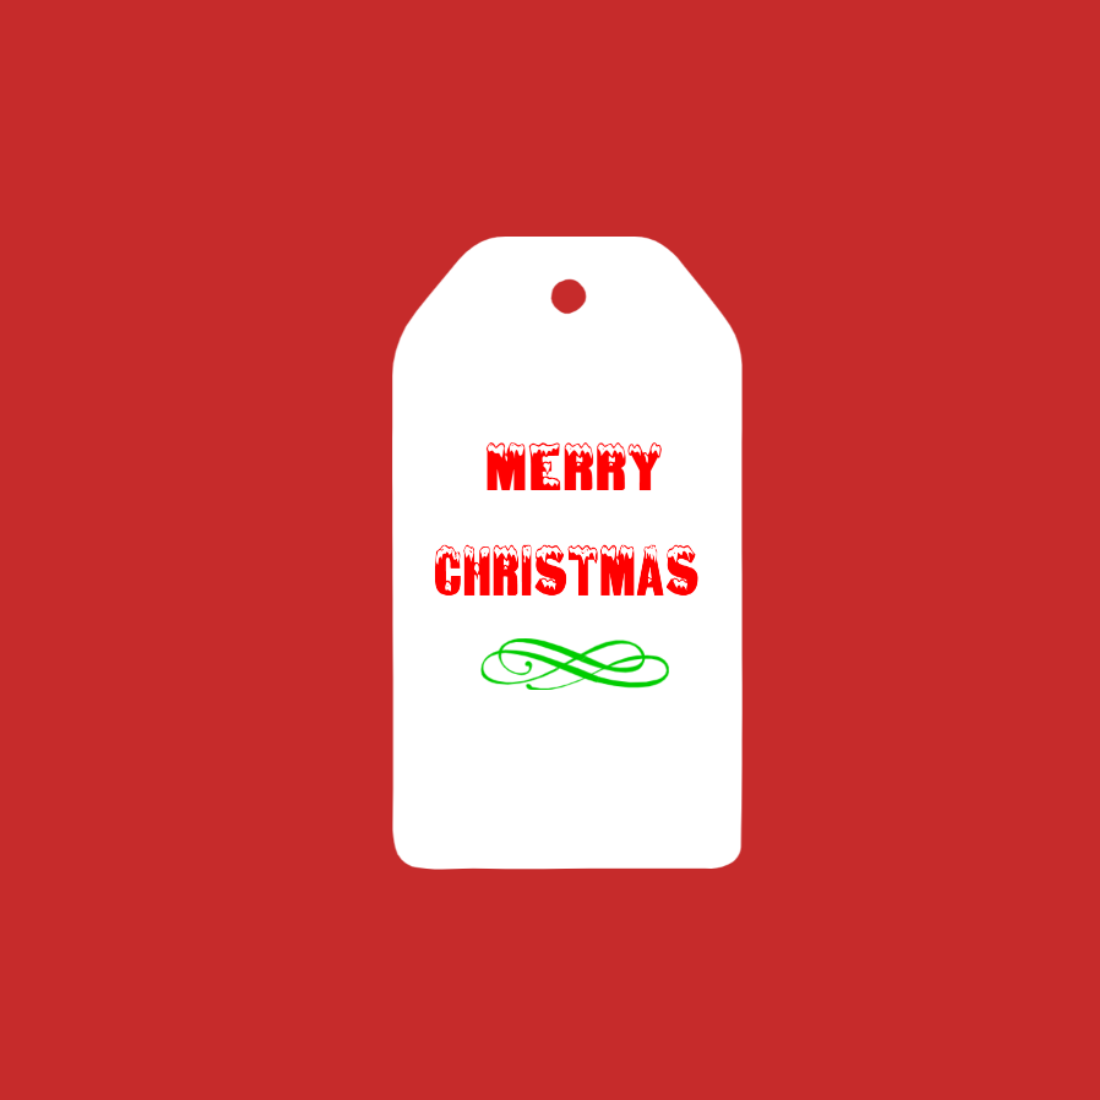 Merry Christmas Gift Tags Design cover image.